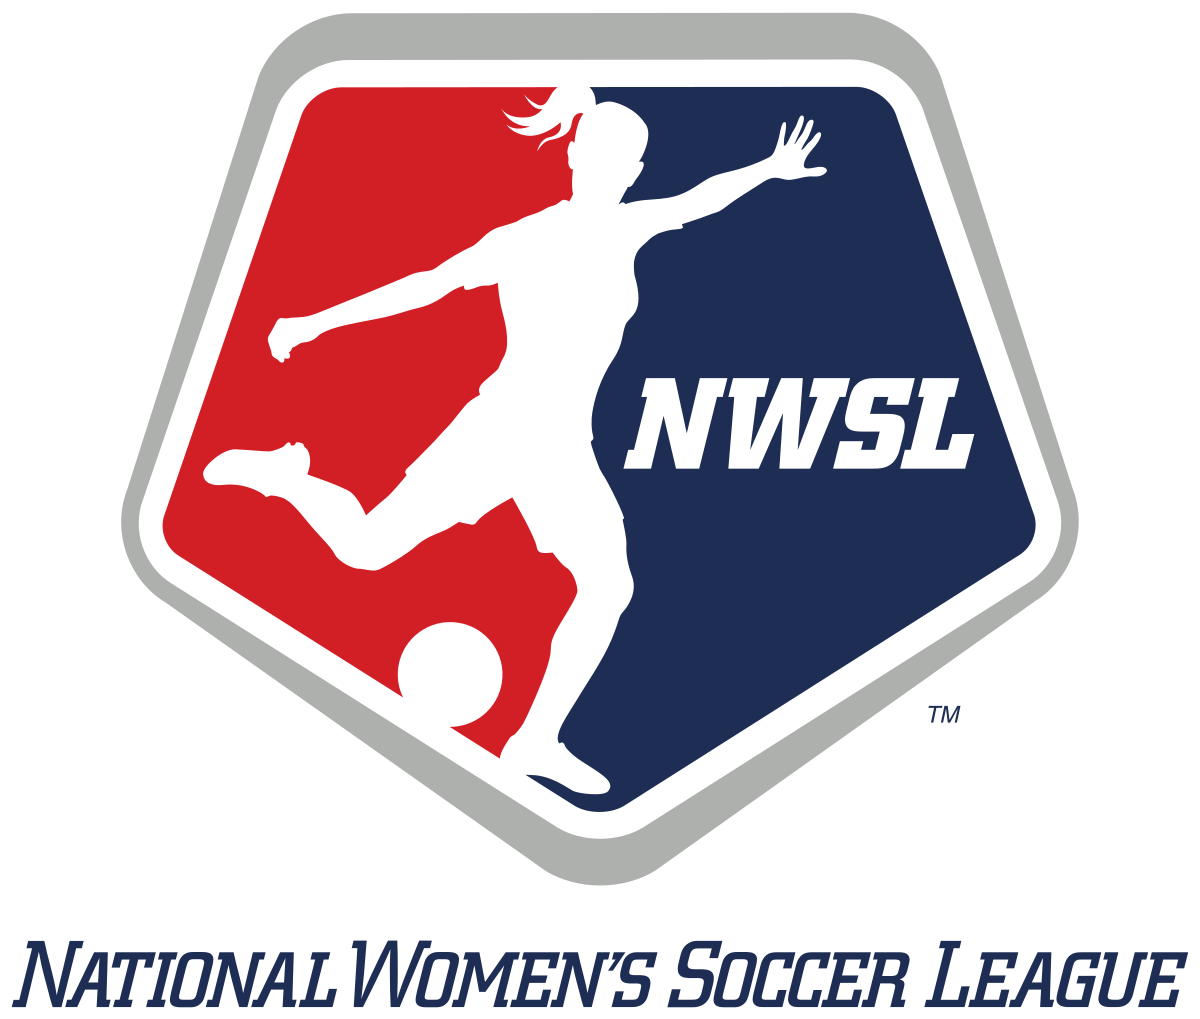 NWSL Announces Television and Streaming Details for 2023 Season Across CBS Sports Platforms